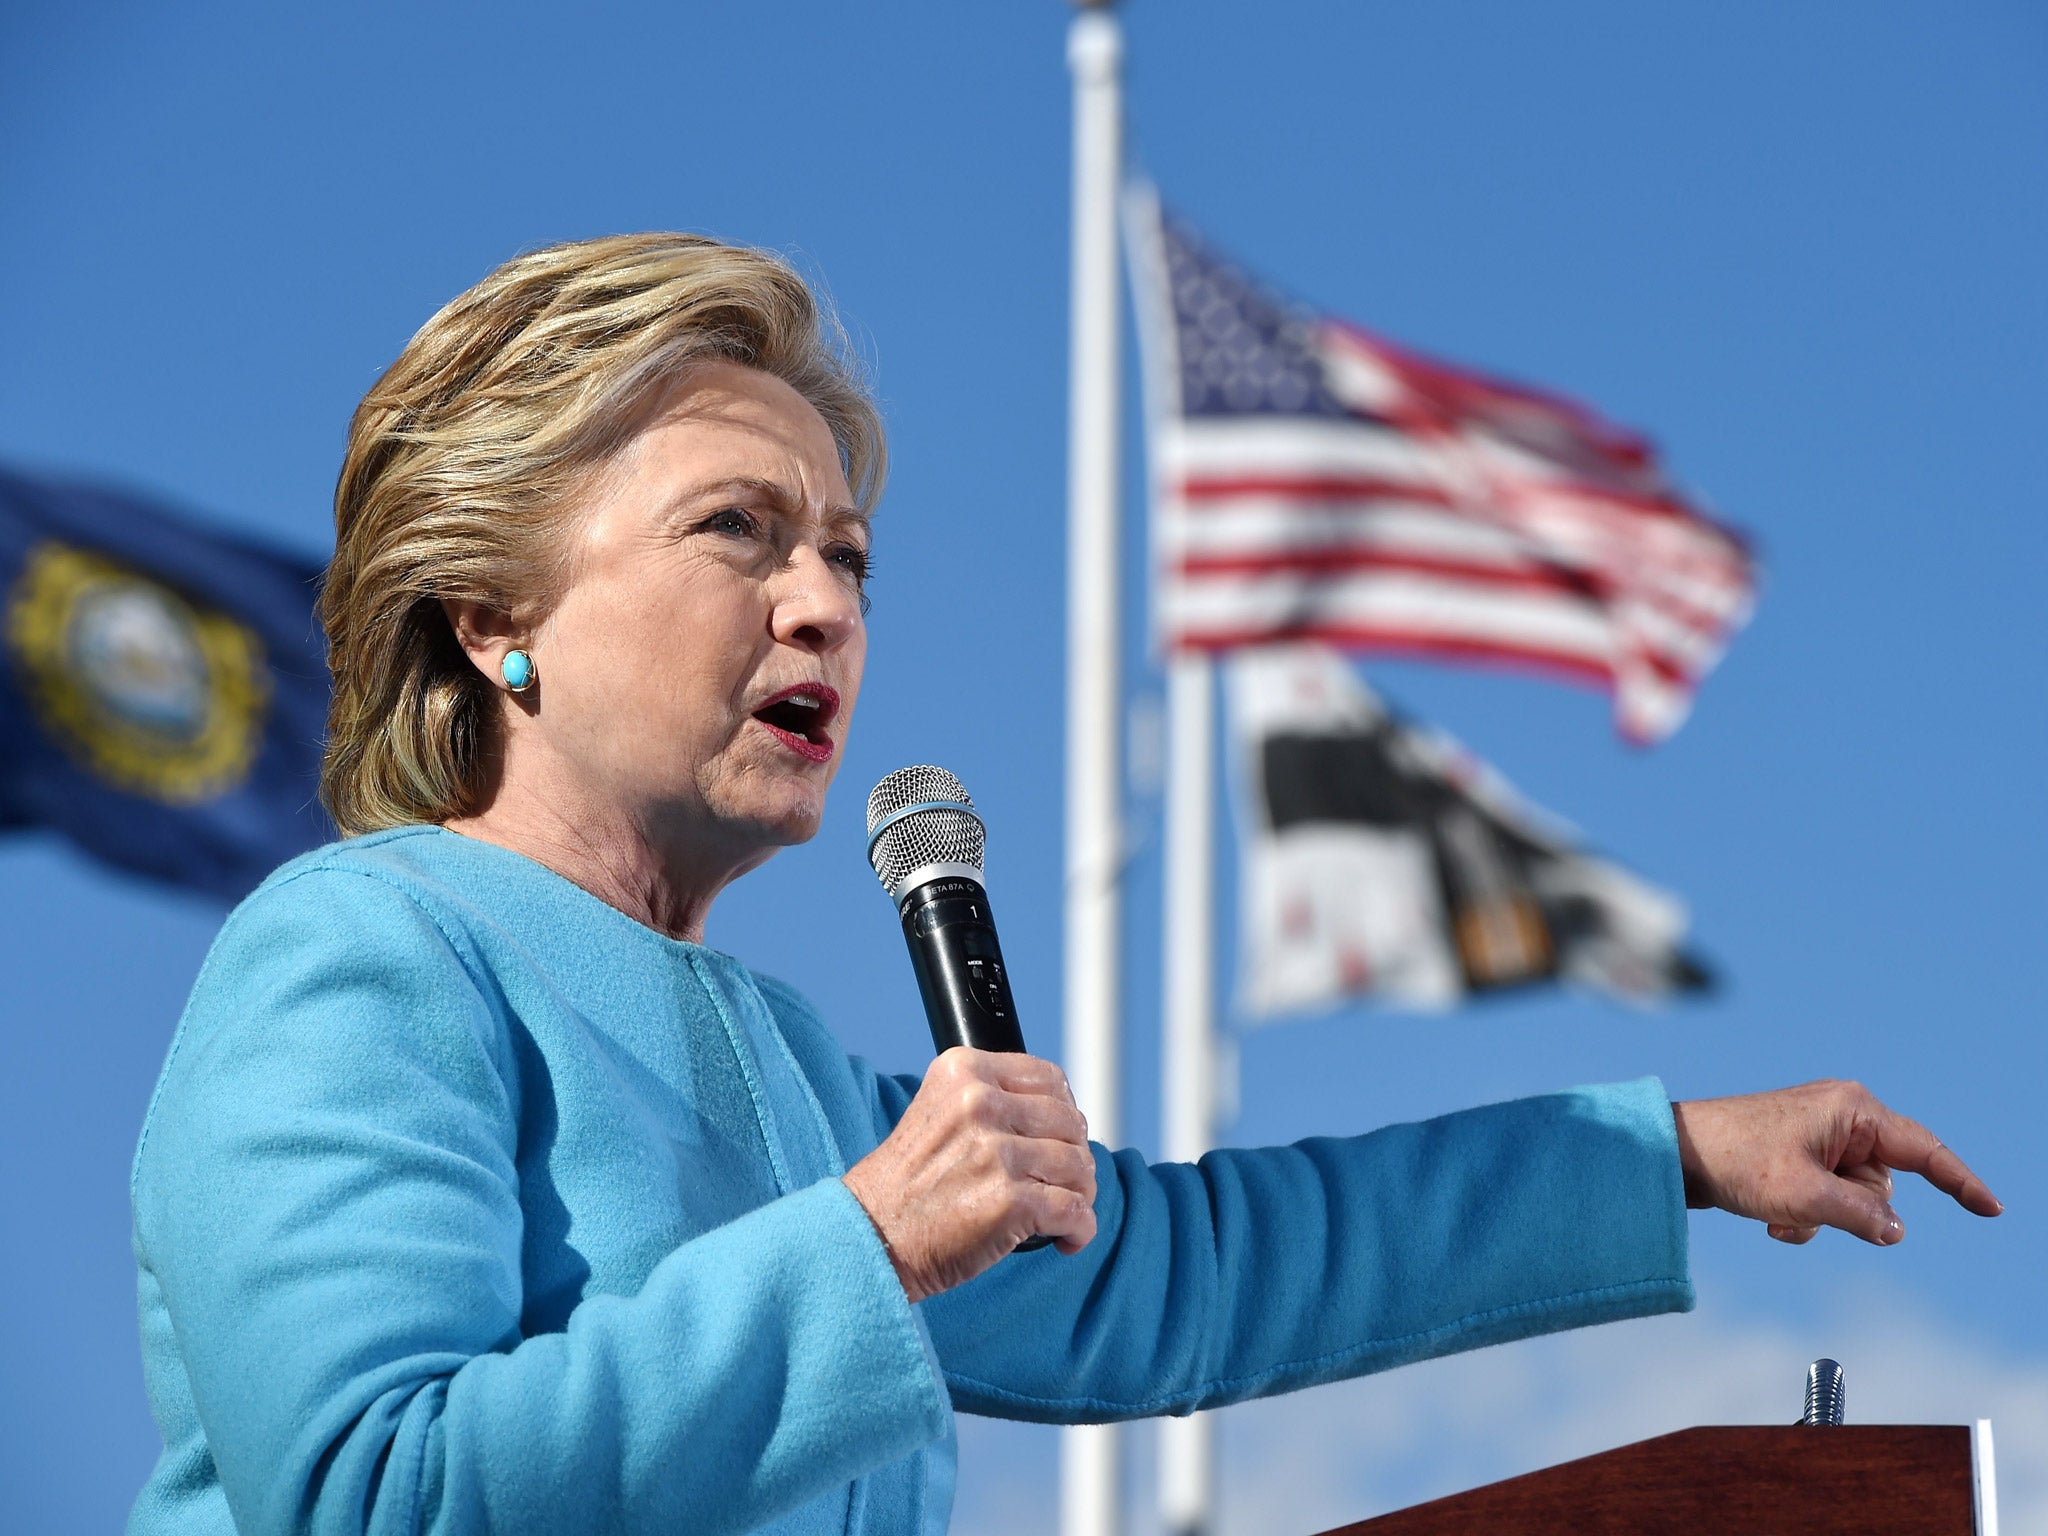 49 per cent of women polled have rated Hillary Clinton unfavourably